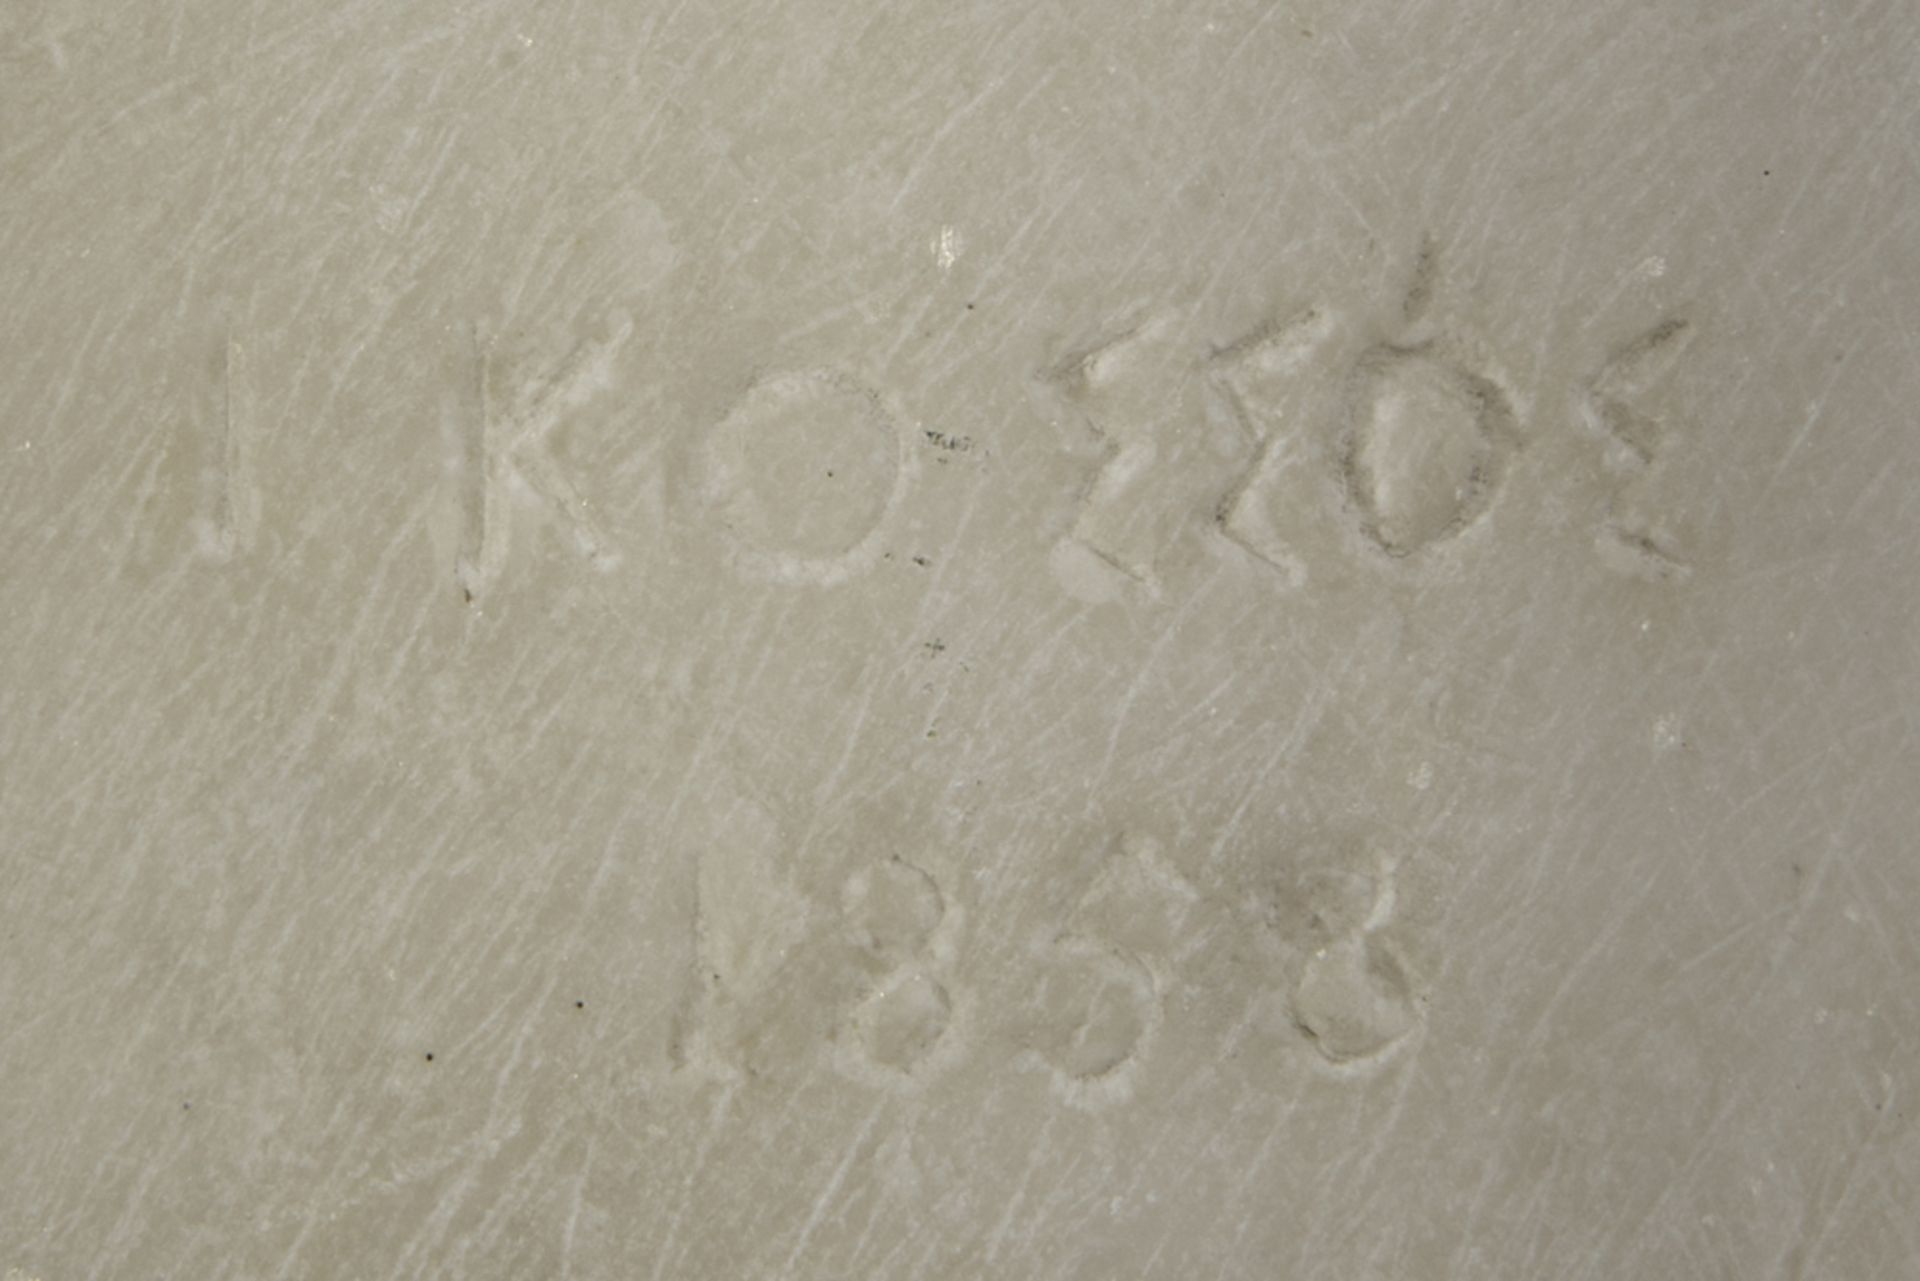 19th Cent. Ioannis Kossos signed "Bust of a Greek Adonis" sculpture in Carrara marble - signed in - Image 7 of 7